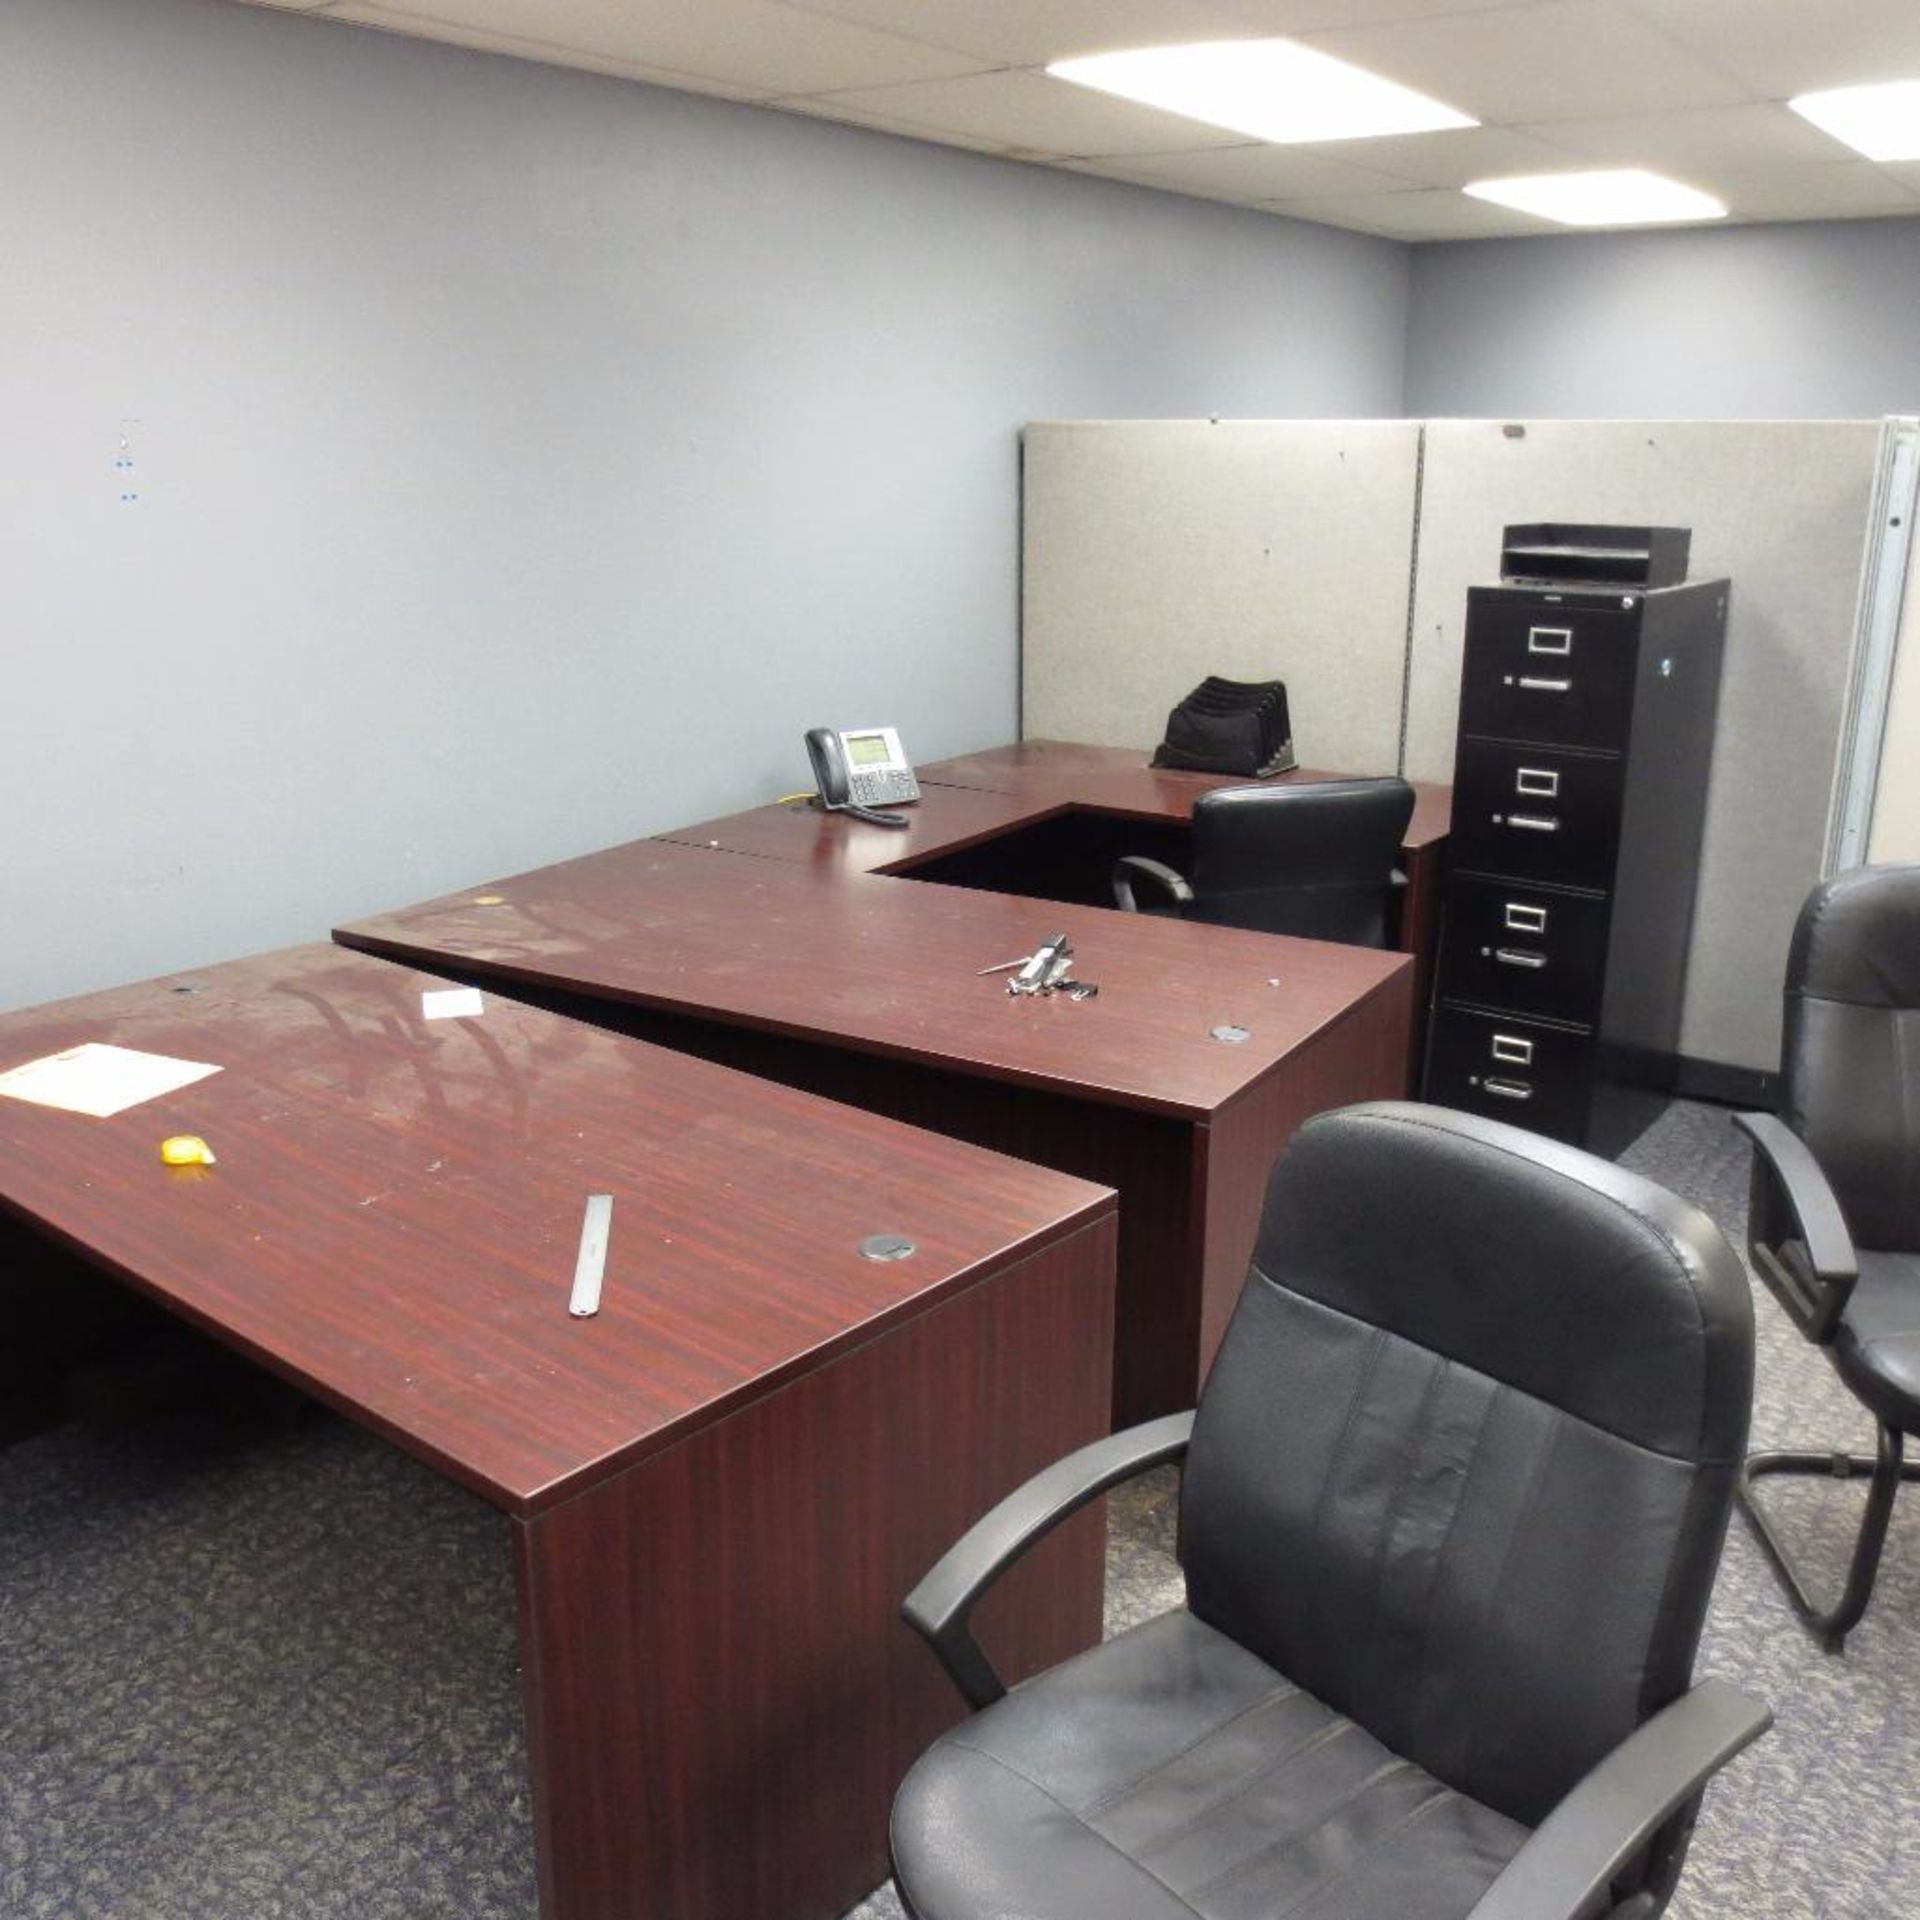 Office Dividers, Desk, File Cabinets and Chairs - Image 5 of 7